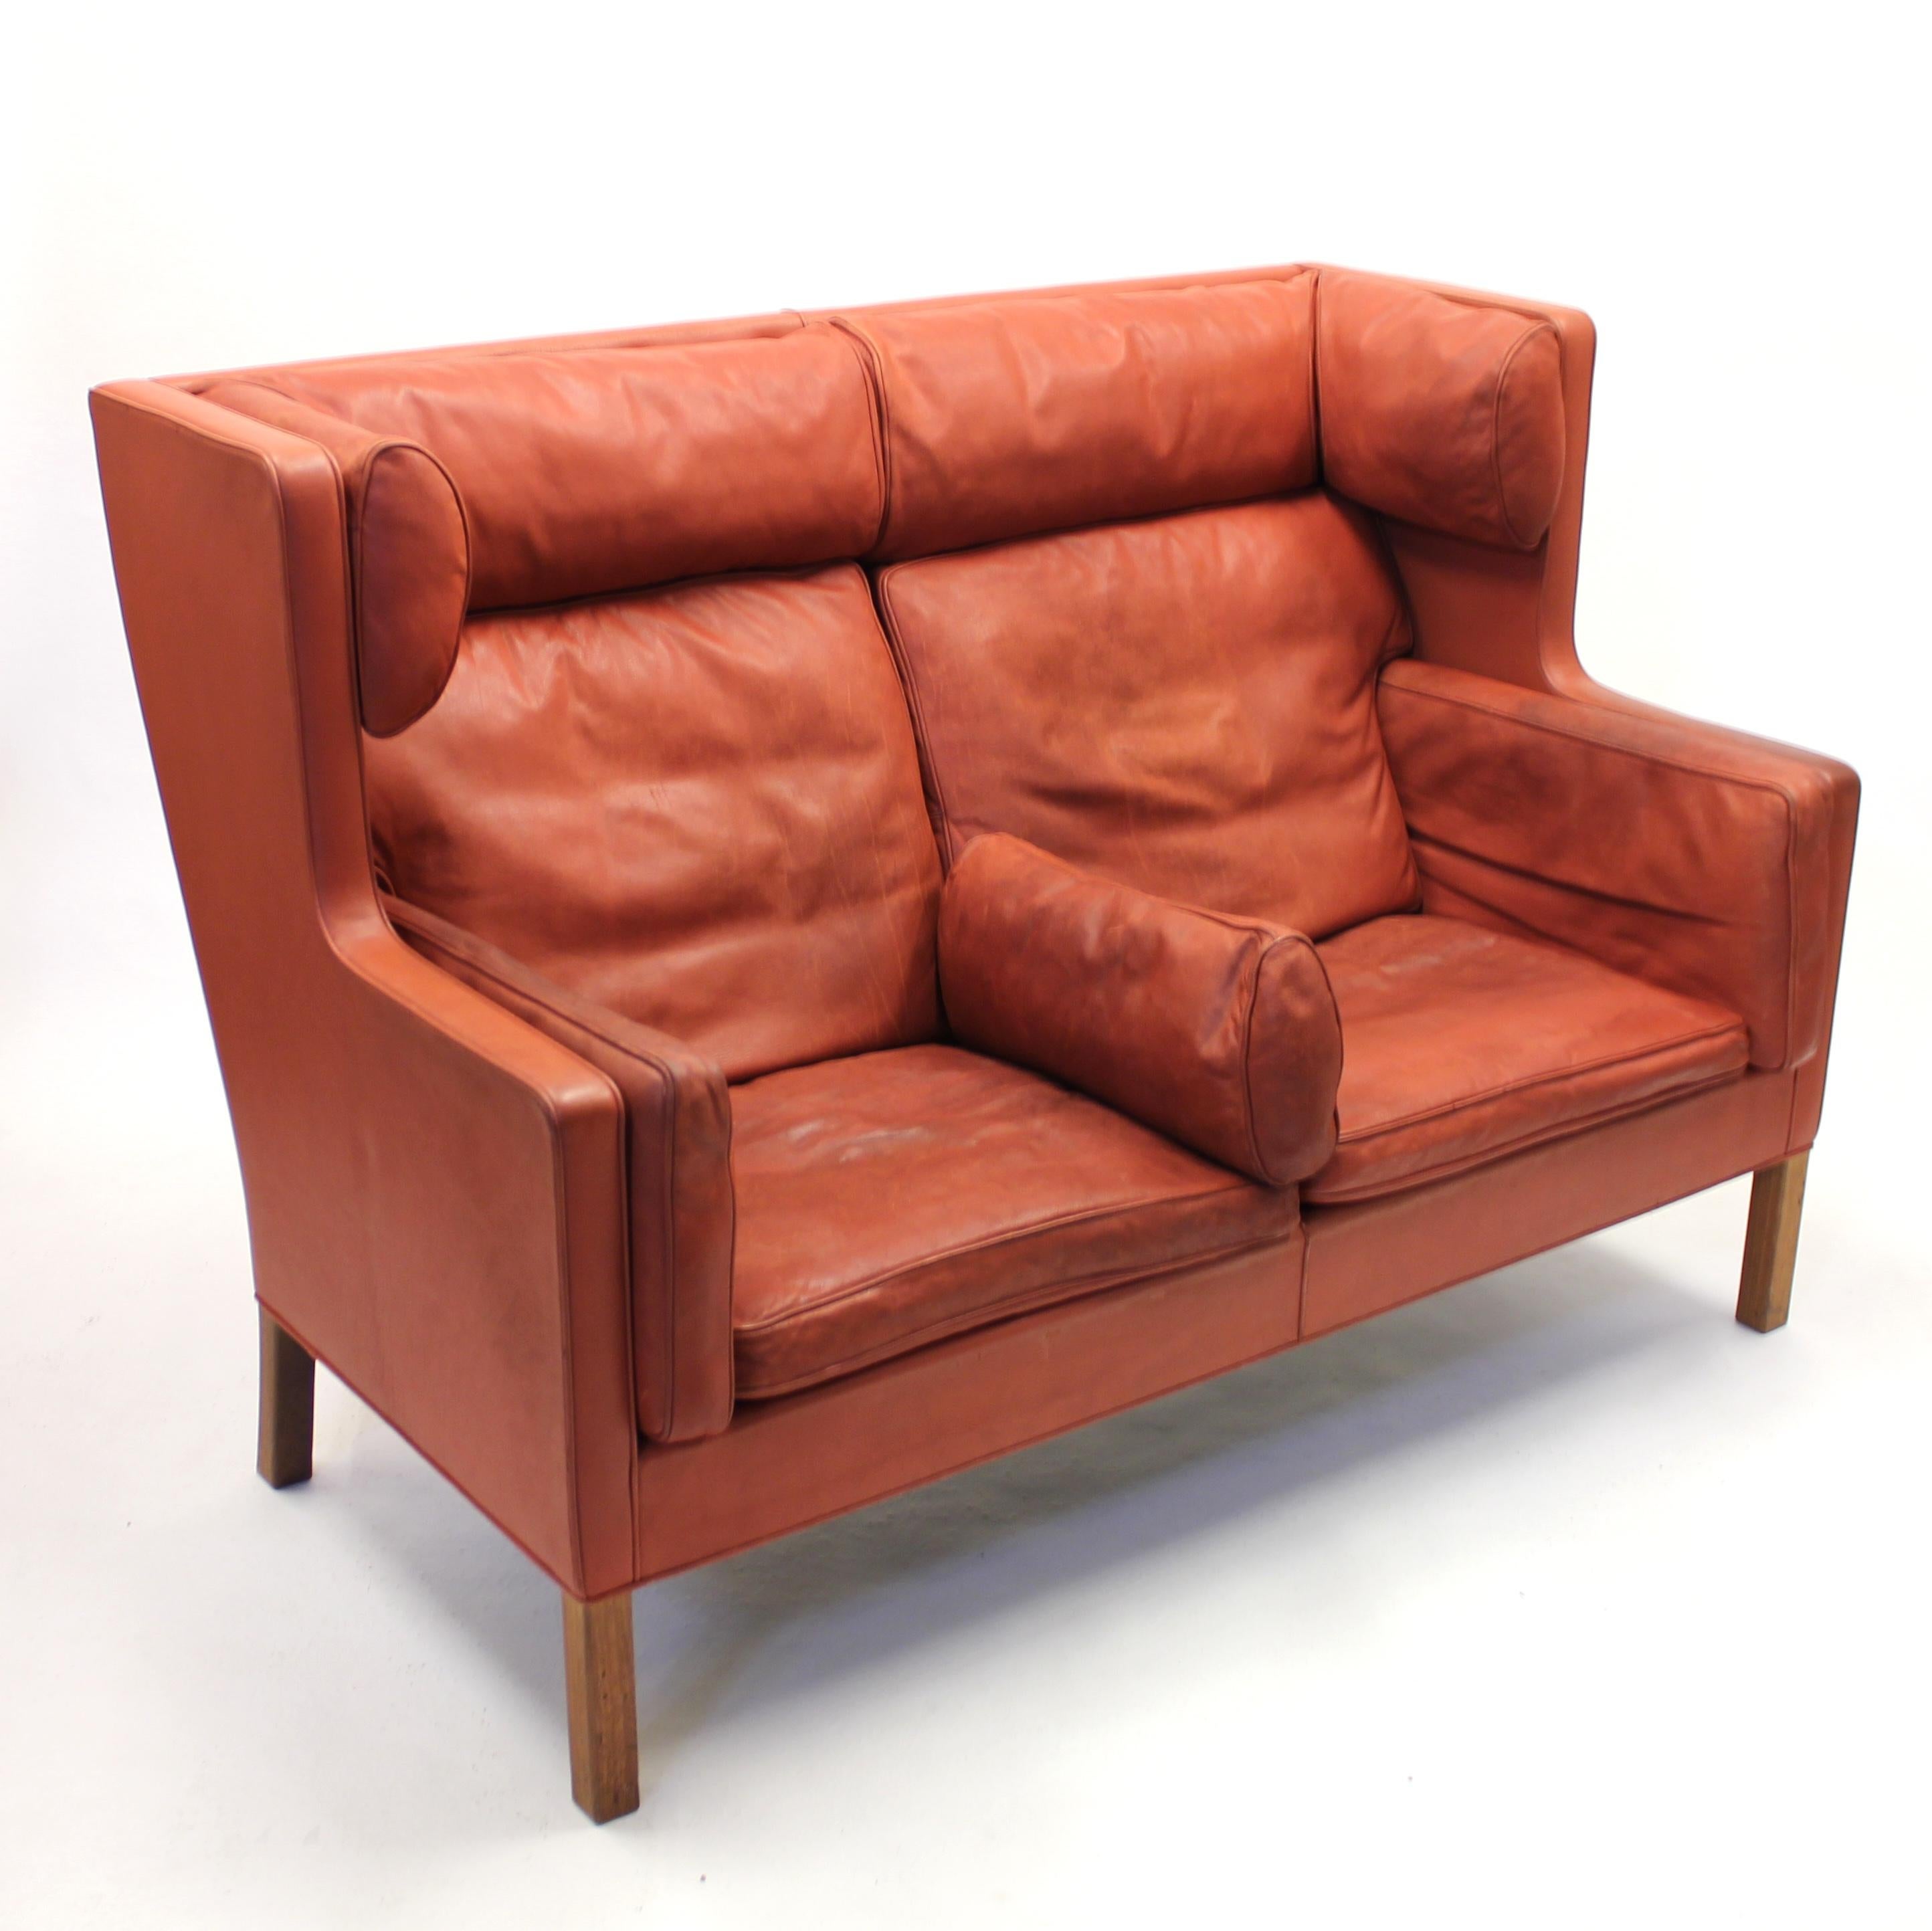 Two seater leather coupe sofa, model 2192, designed by Børge Mogensen for Frederica Furniture. Made in the 1980s. Upholstery in red / brown / cognac coloured leather on teak legs. This sofa has quite a bit of honest patina, weathered look and some